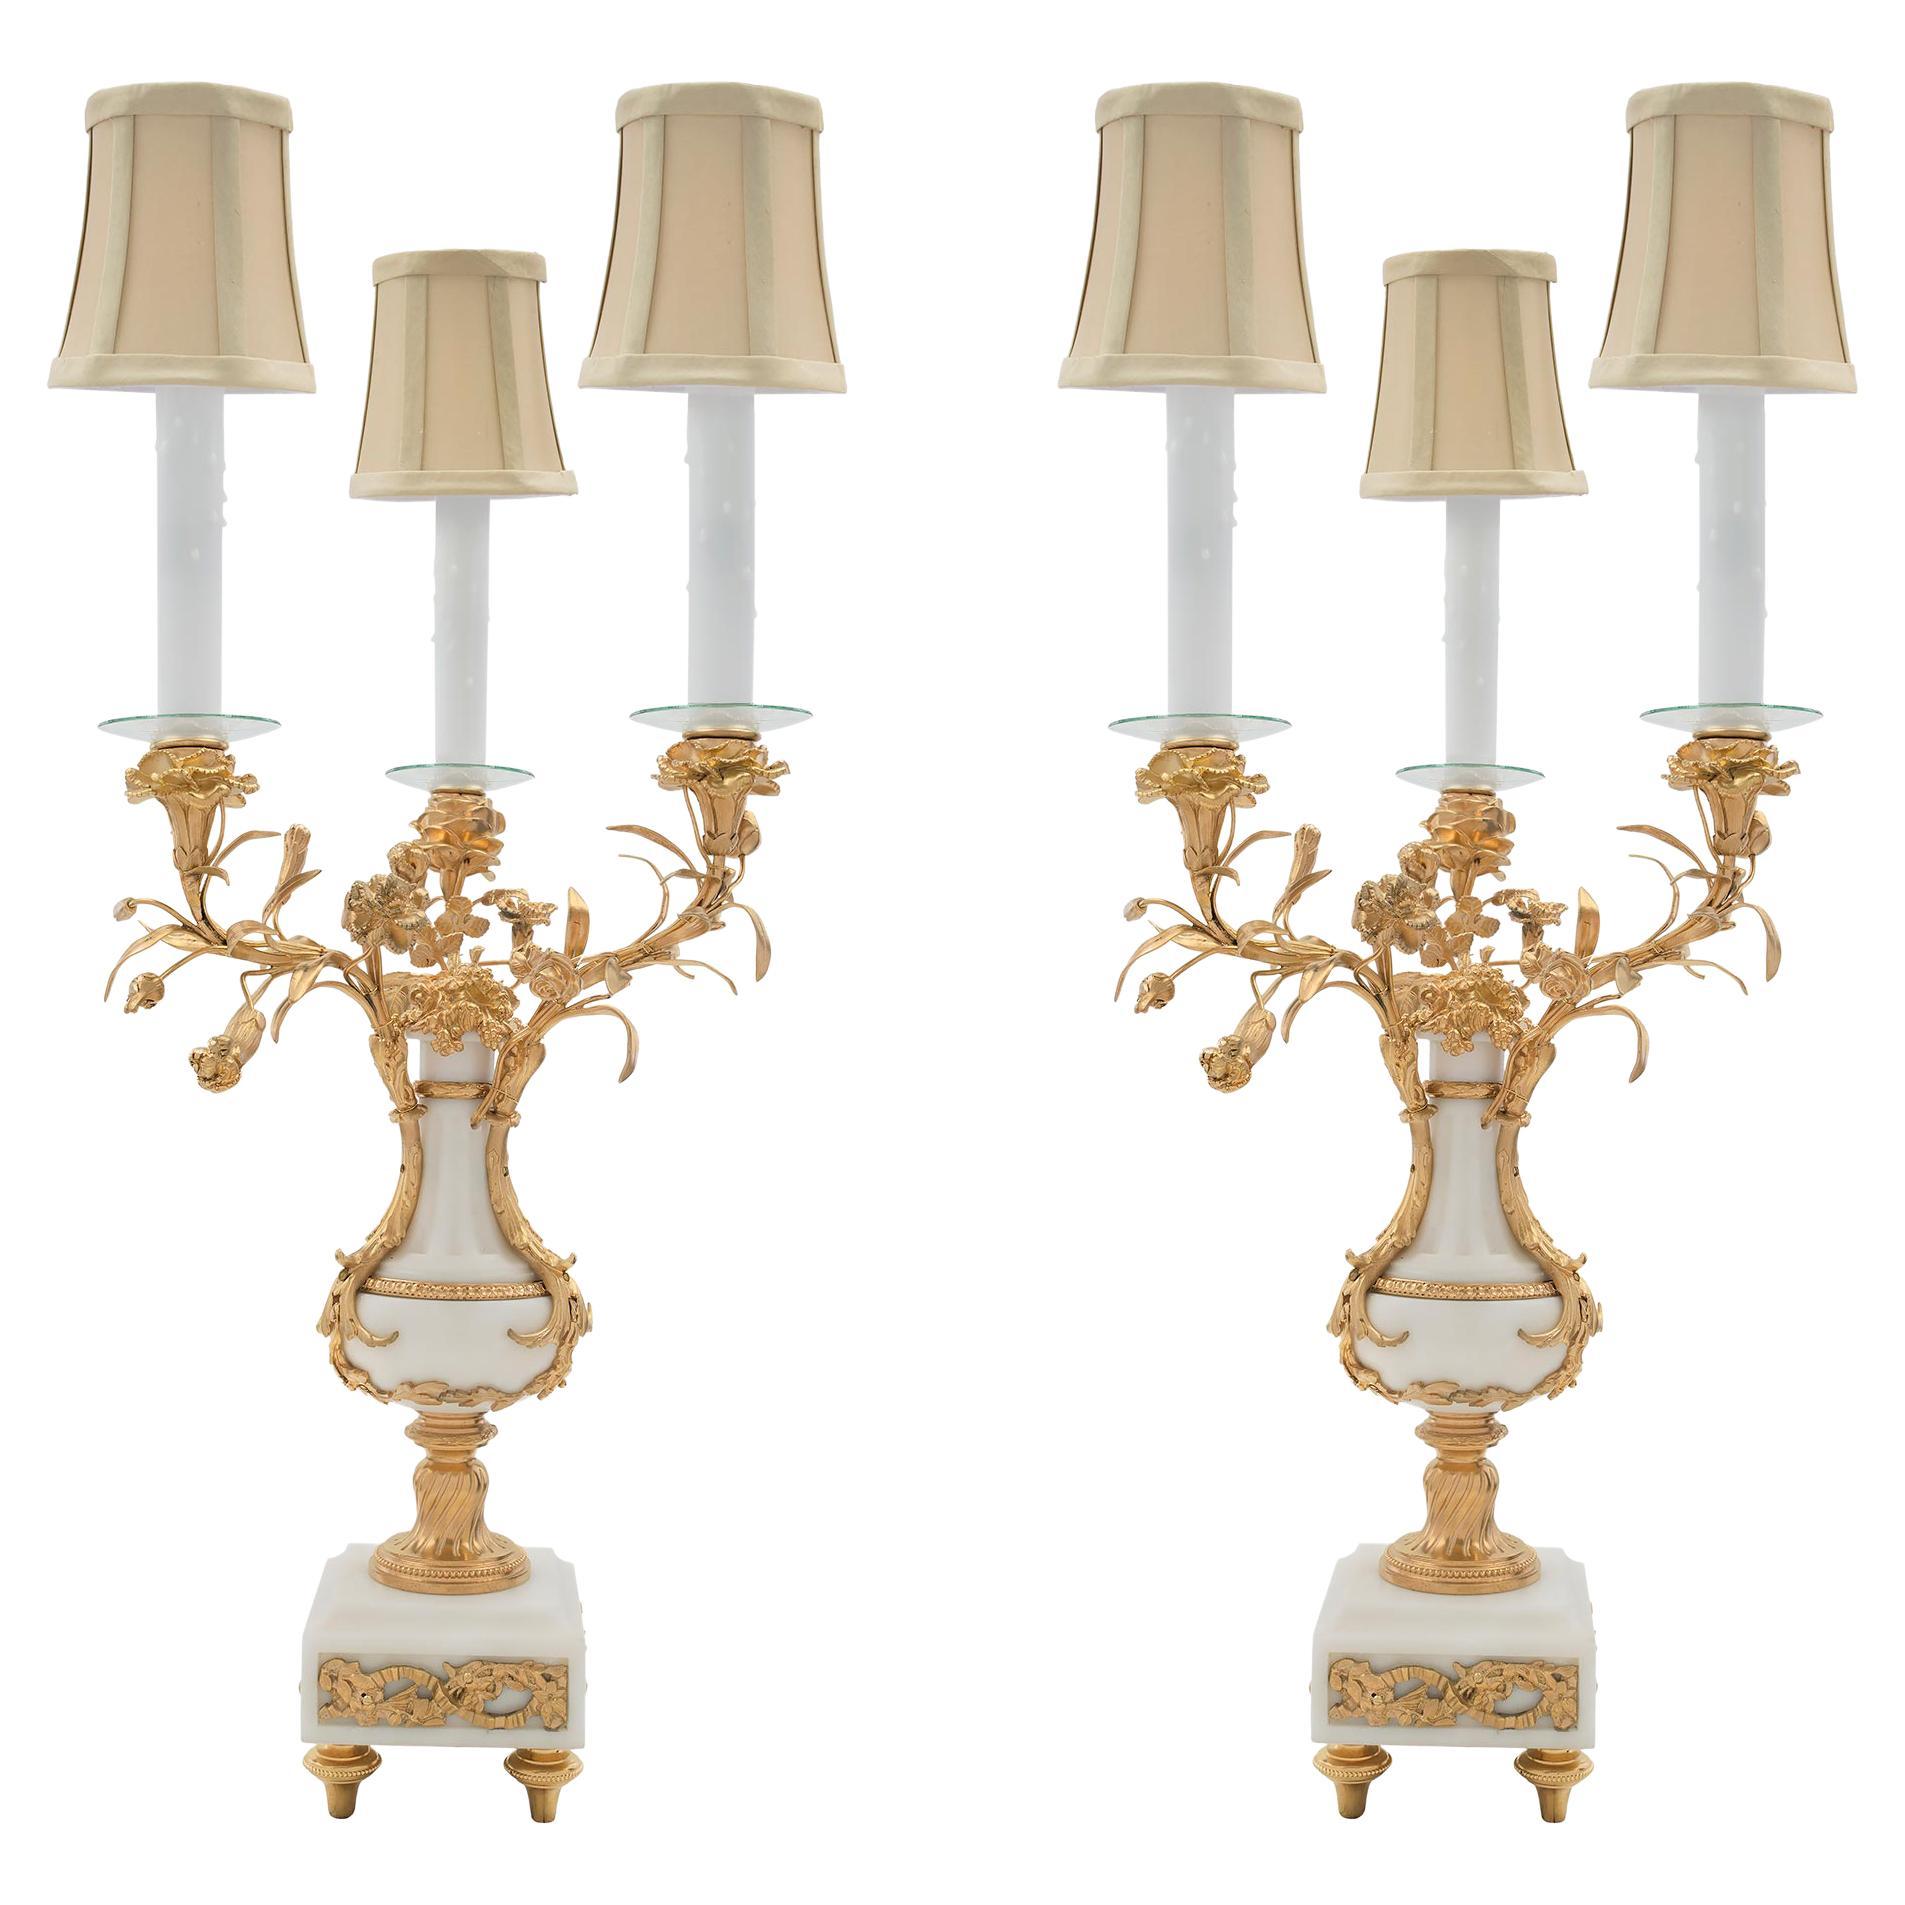 Pair of French 19th Century Louis XVI Style Three-Arm Electrified Candelabras For Sale